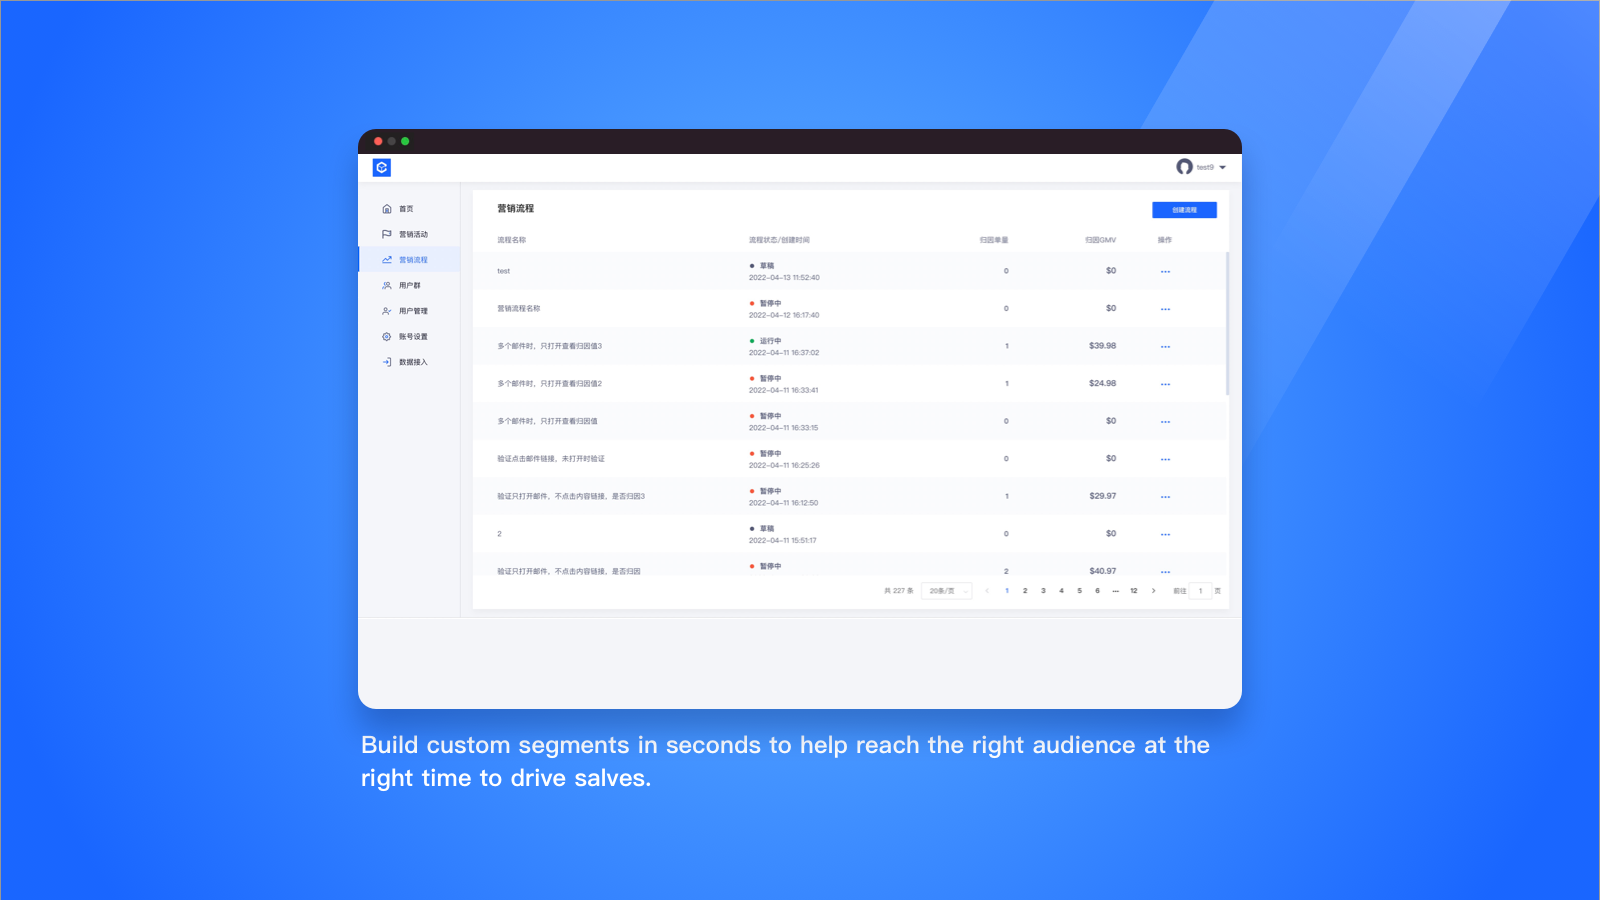 Build custom segments in seconds to help reach  right audience